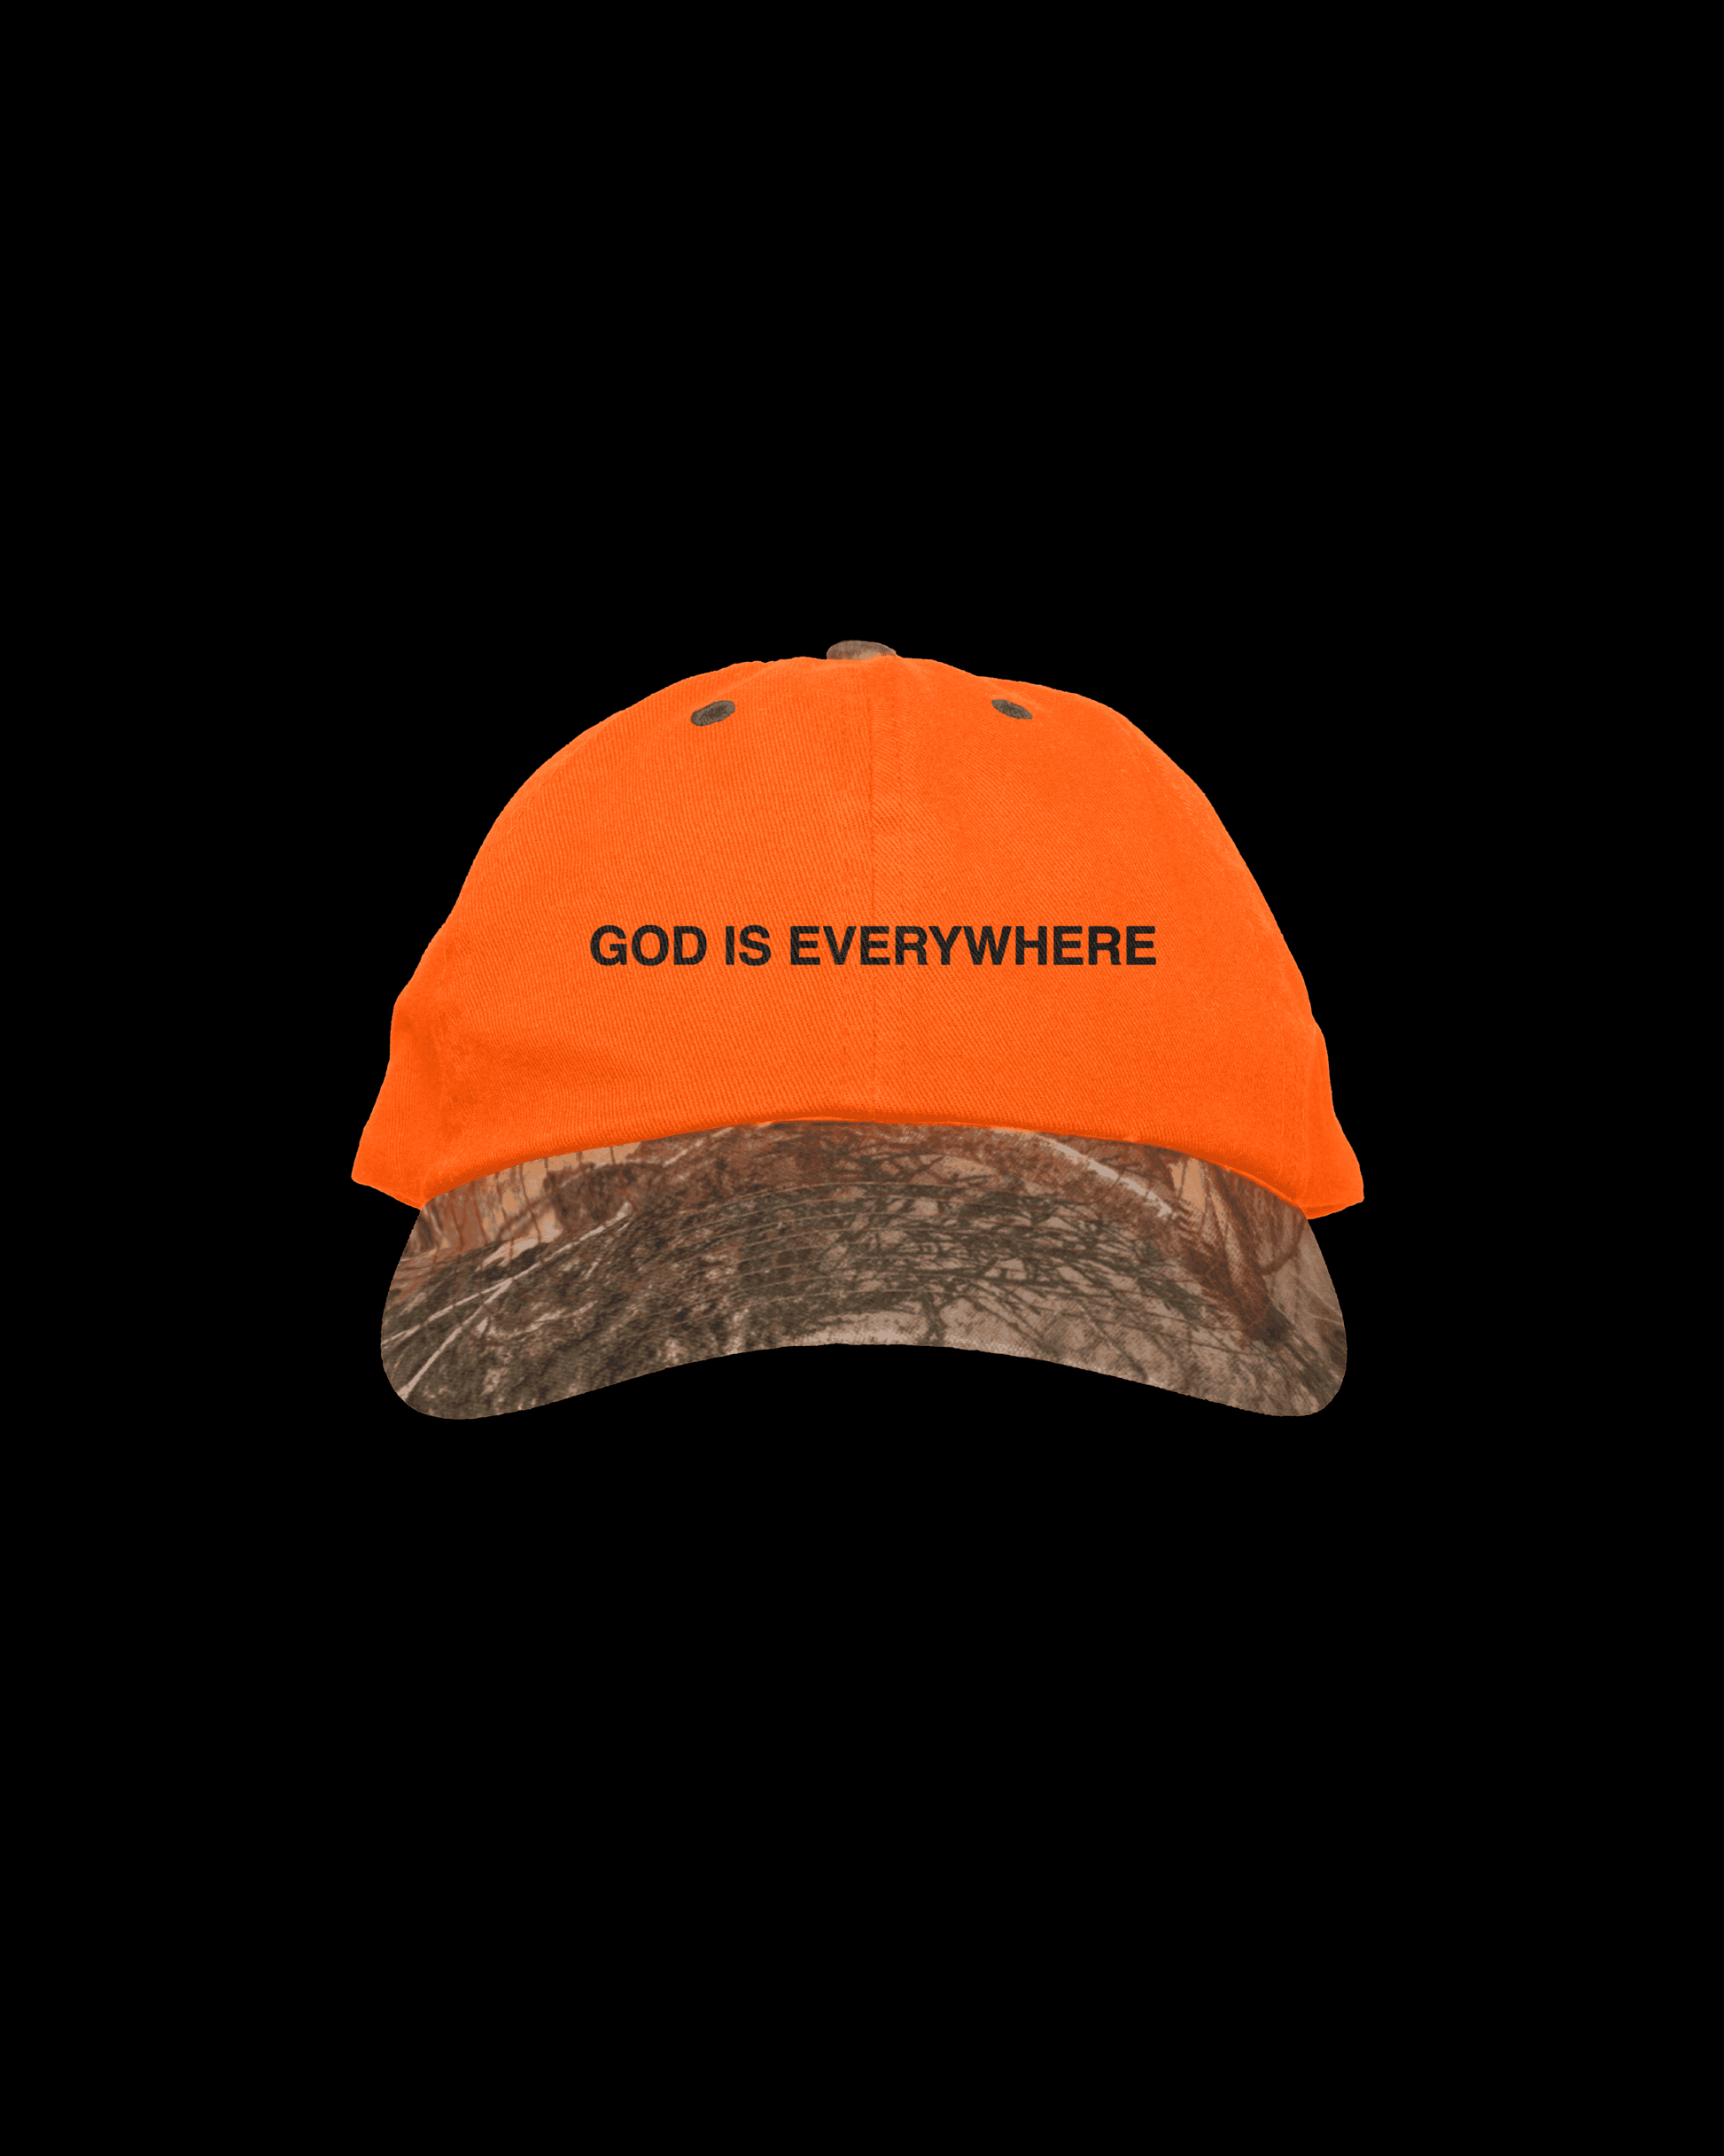 GOD IS EVERYWHERE Christian hat in safety orange by NHIM Apparel Christian Clothing Brand